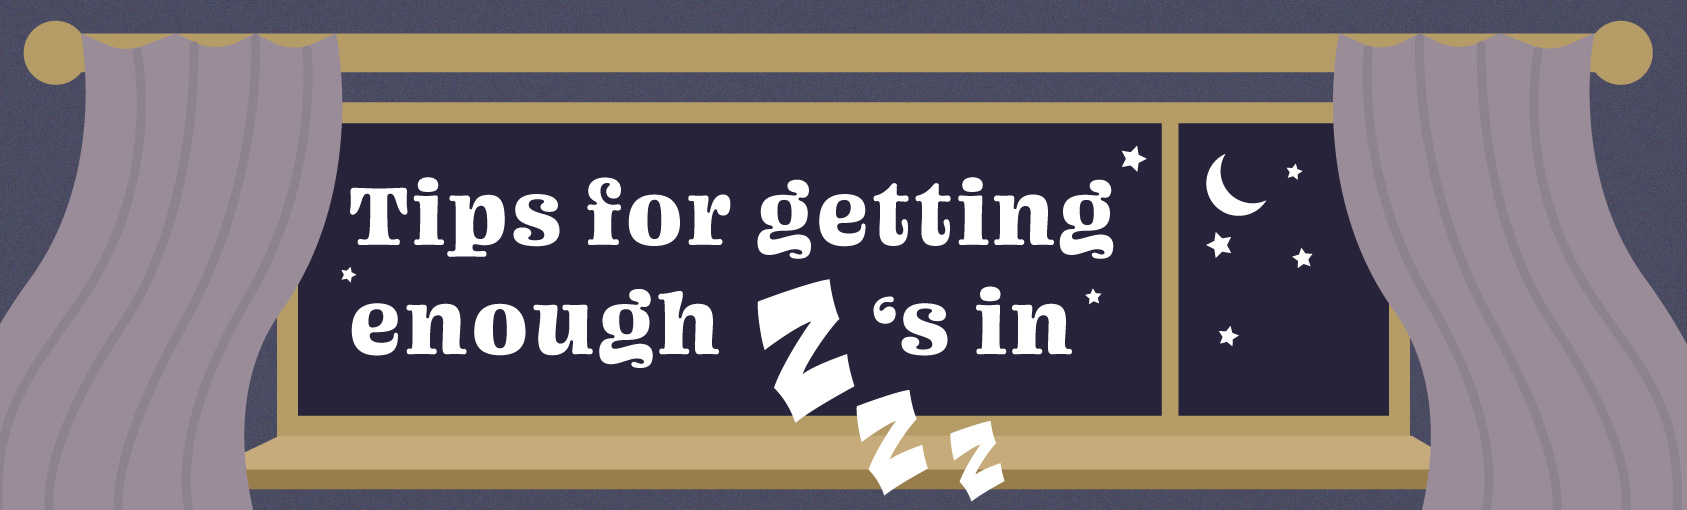 This is a poster about tips for getting enough sleep